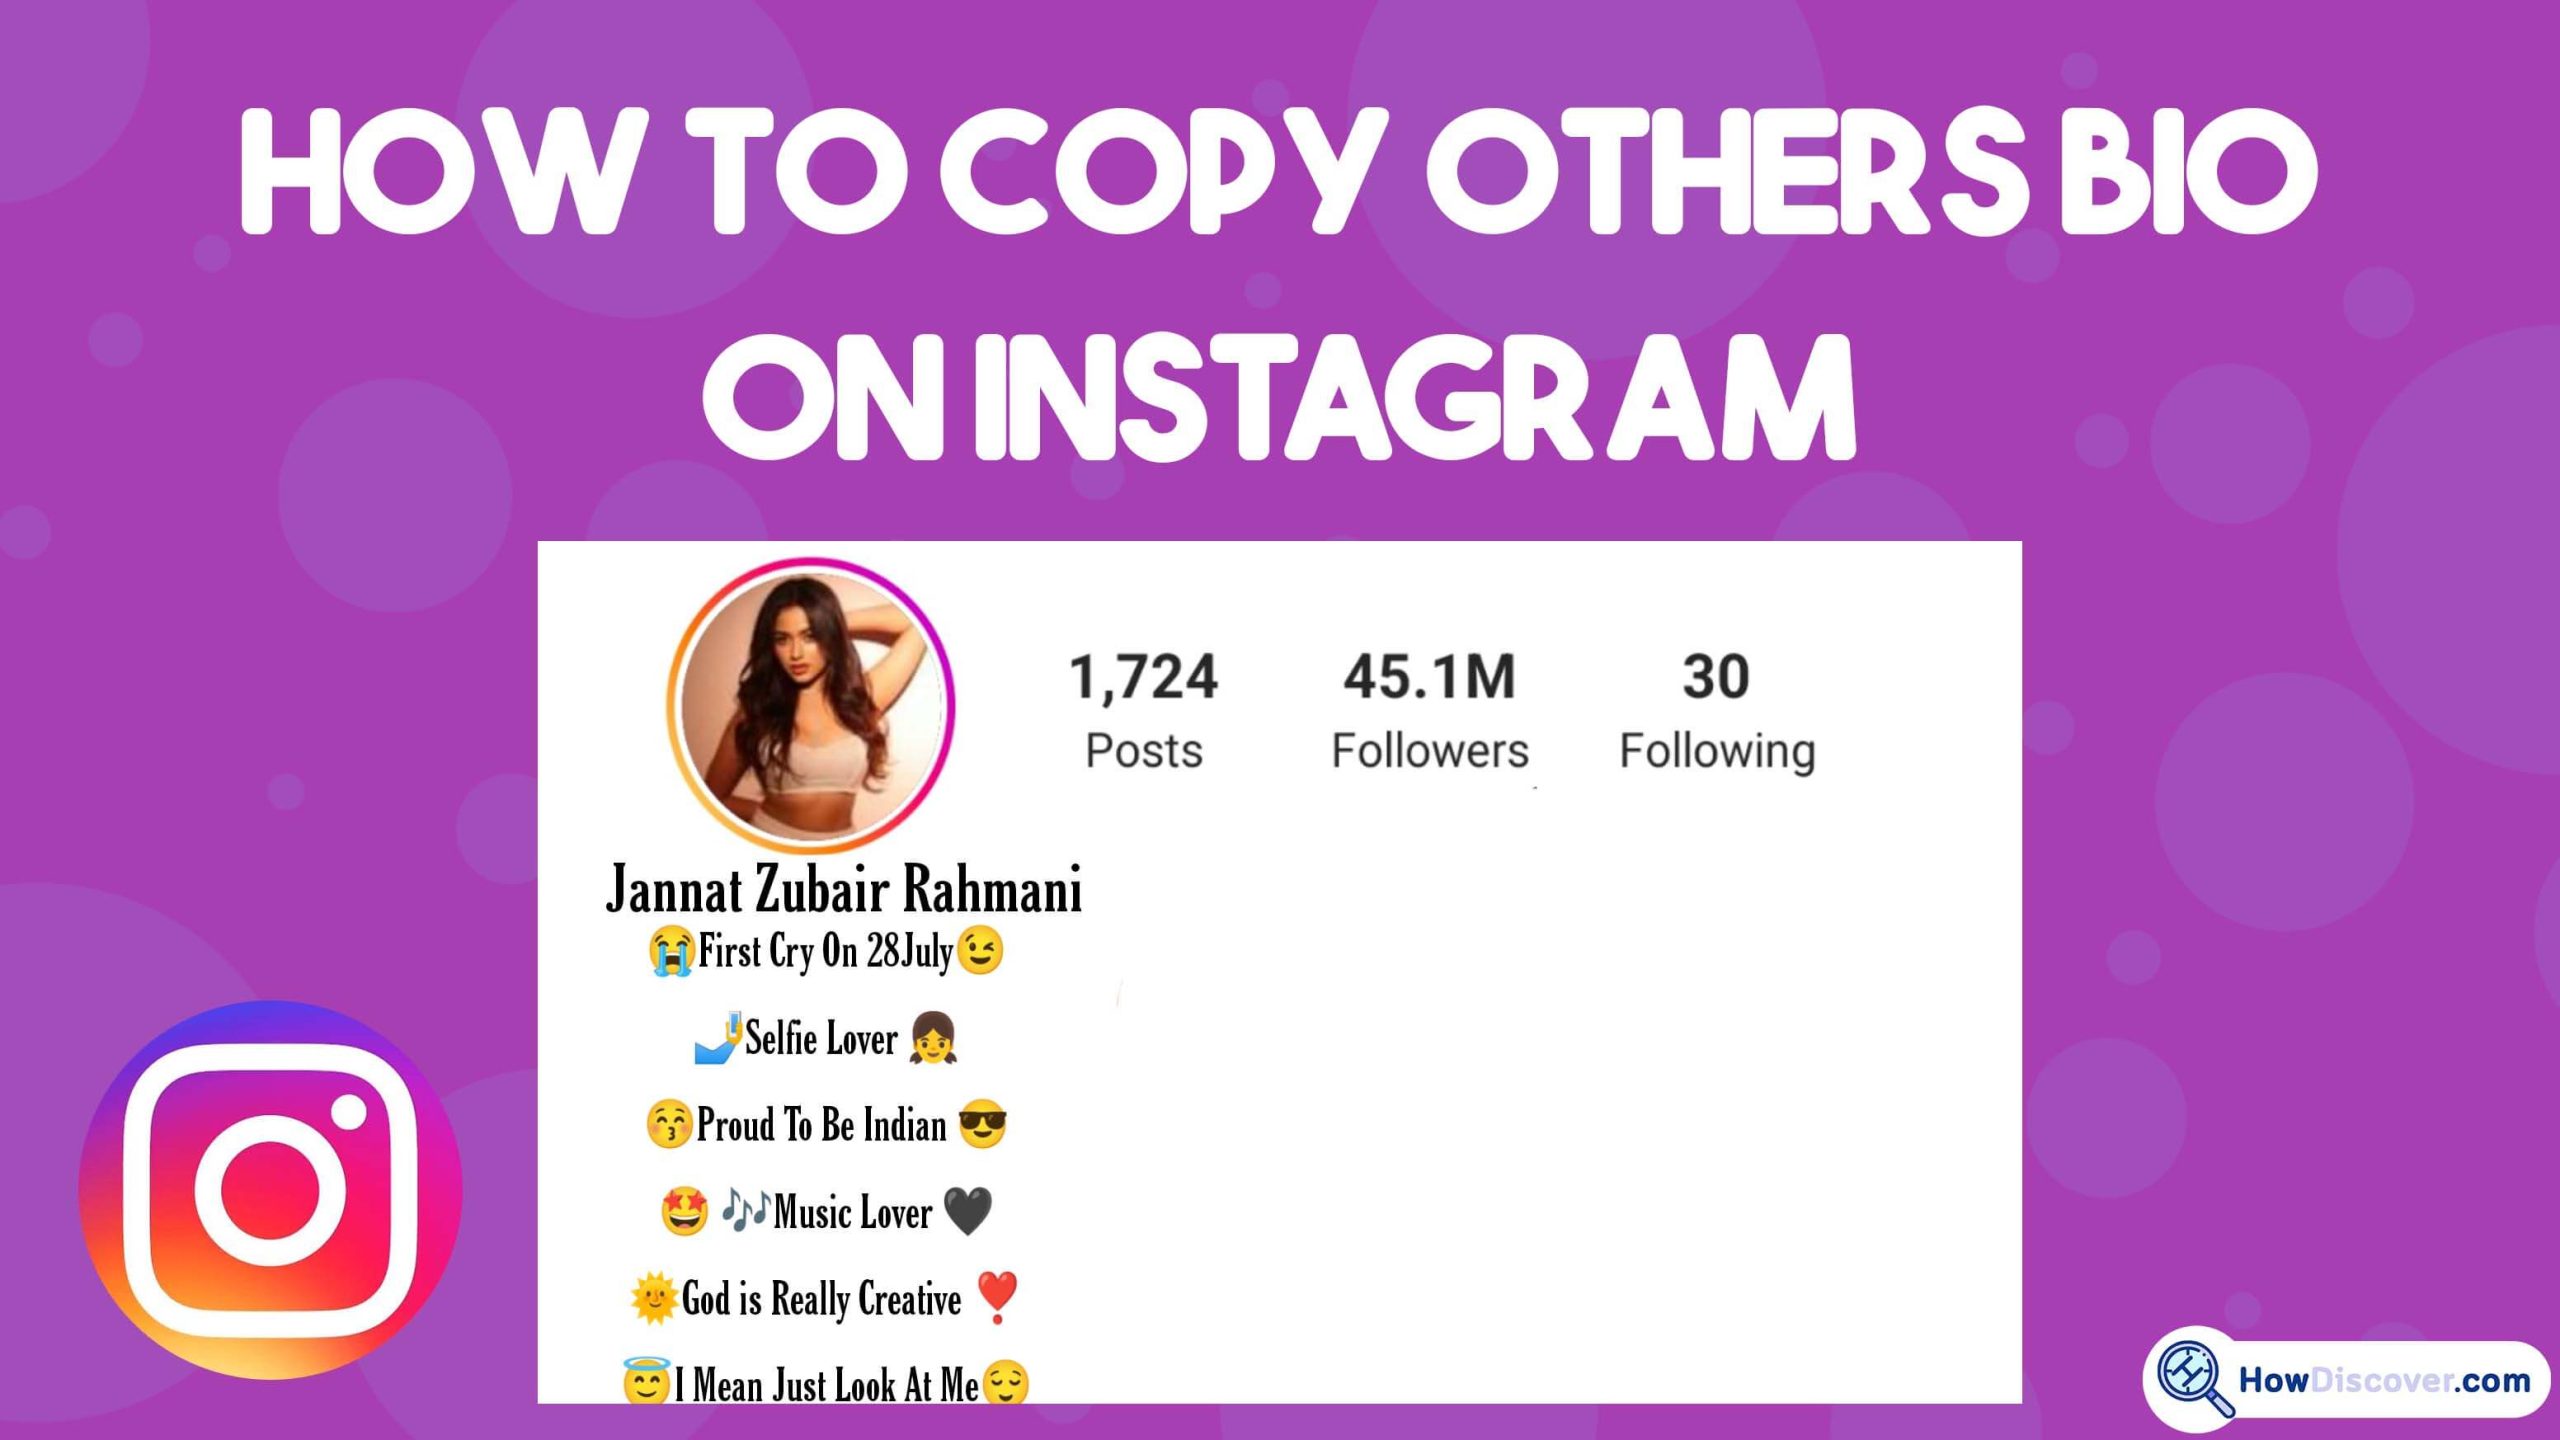 How to Copy Others Bio on Instagram